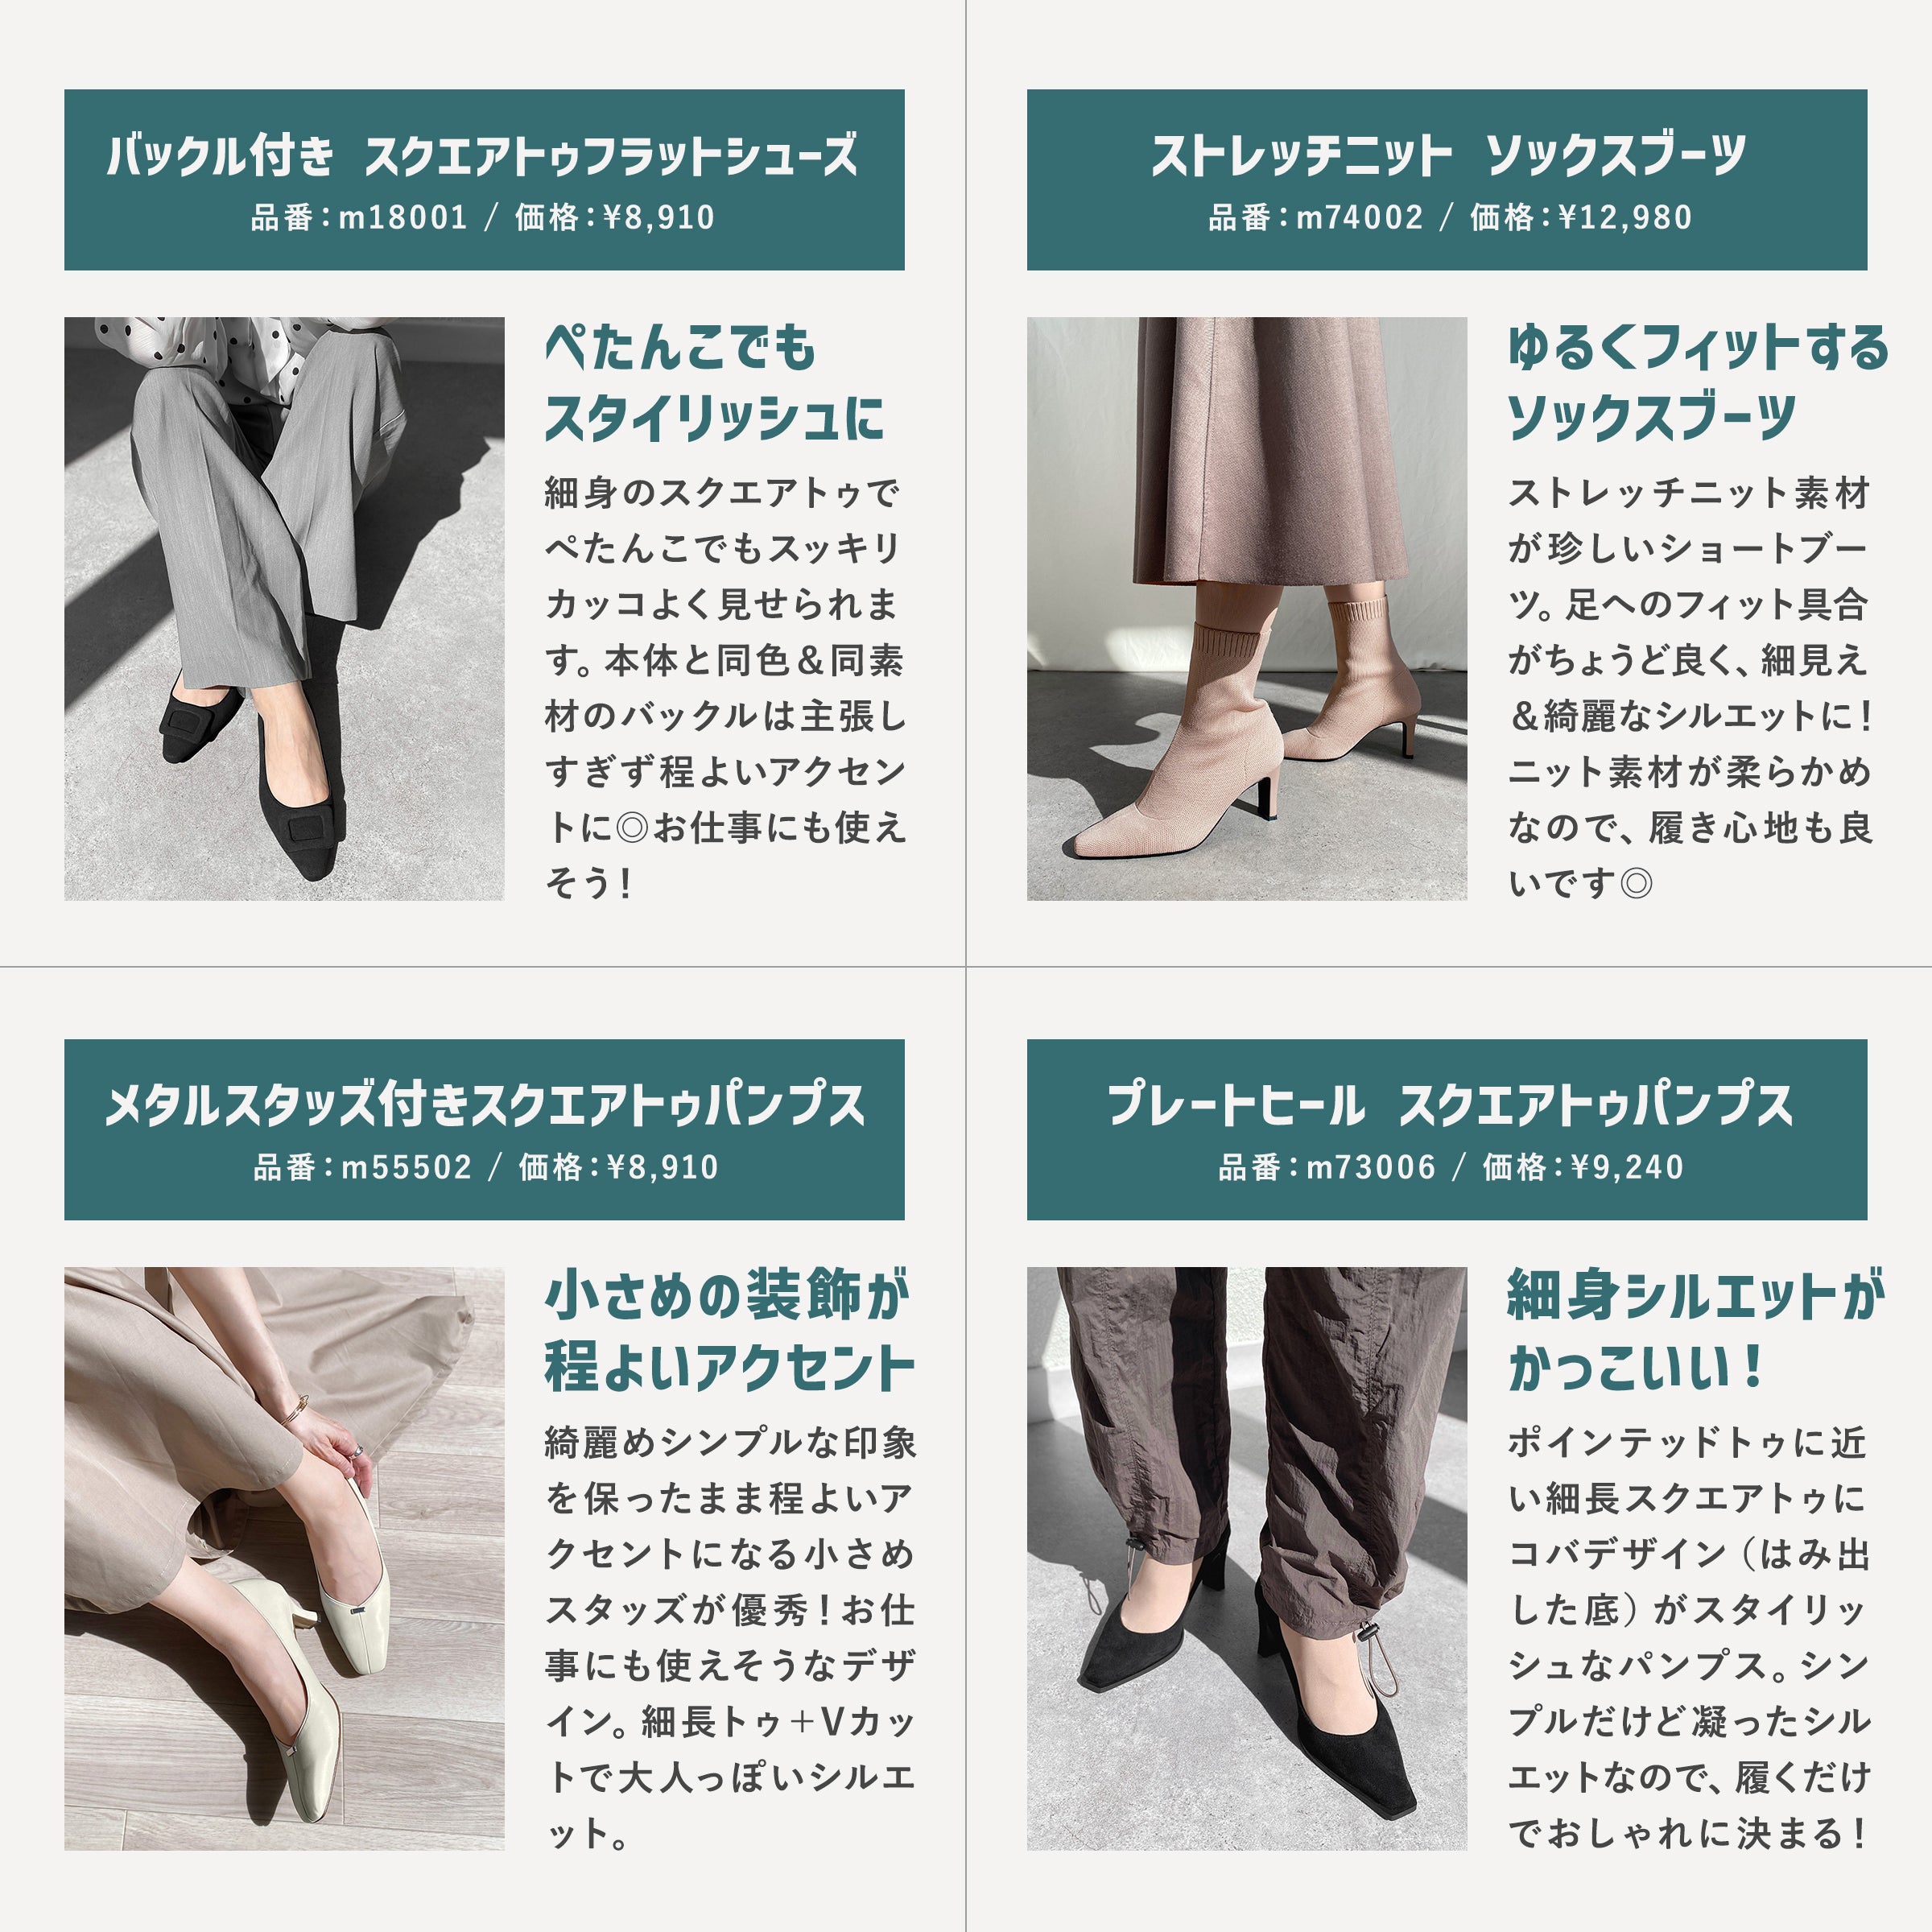 Special feature on elongated square toe shoes